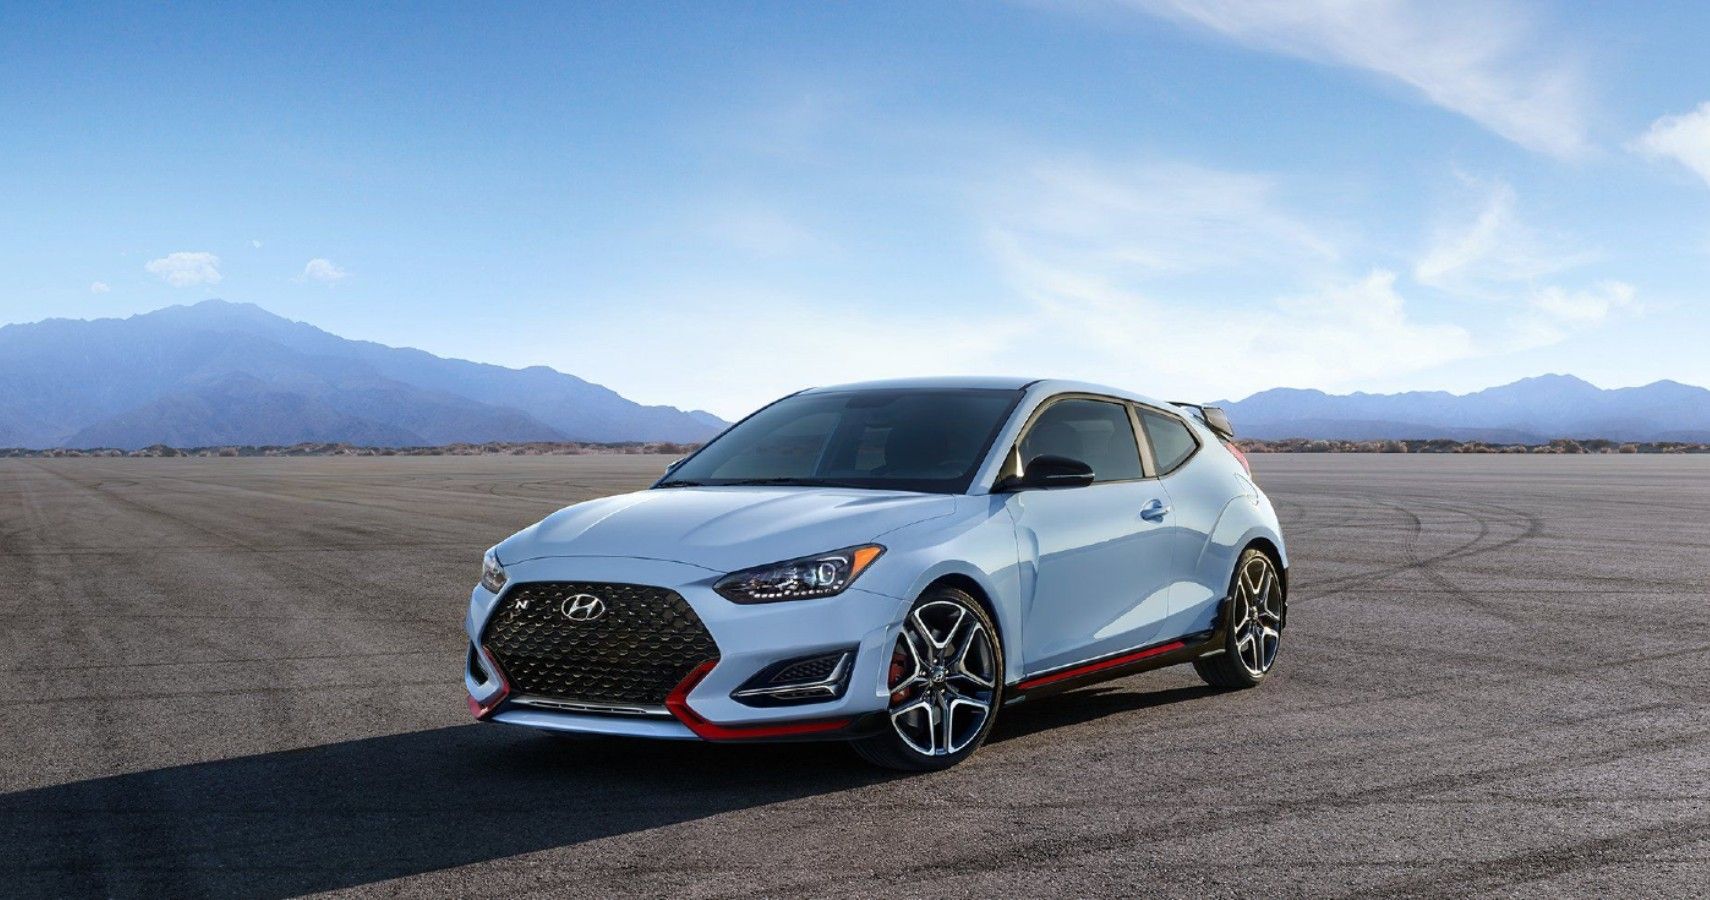 Why The 2022 Hyundai Veloster N Is One Of The Best Subcompact